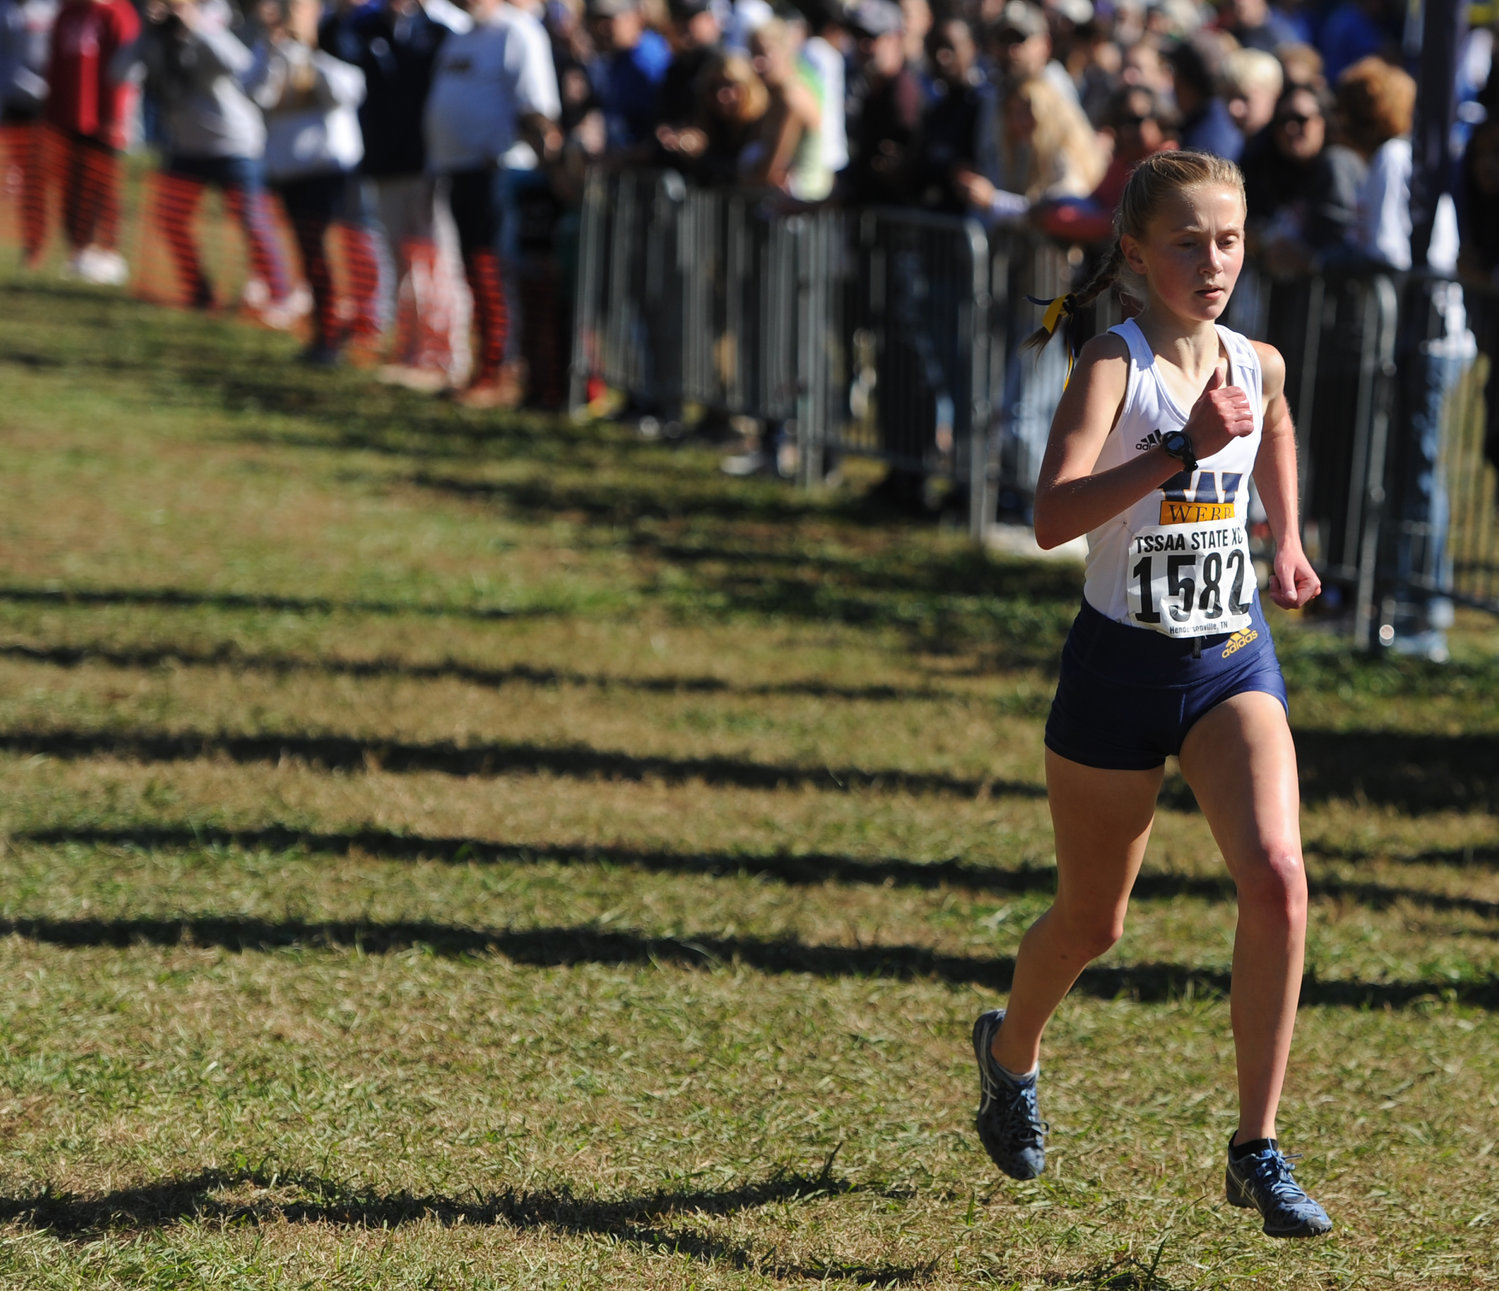 Webb freshman Abby Faith Cheeseman powers her way to the finish line and her first state title in the Division II Class A state championship. She ran a 17:26.91, the fastest time of any classification during the 2021 state meet.